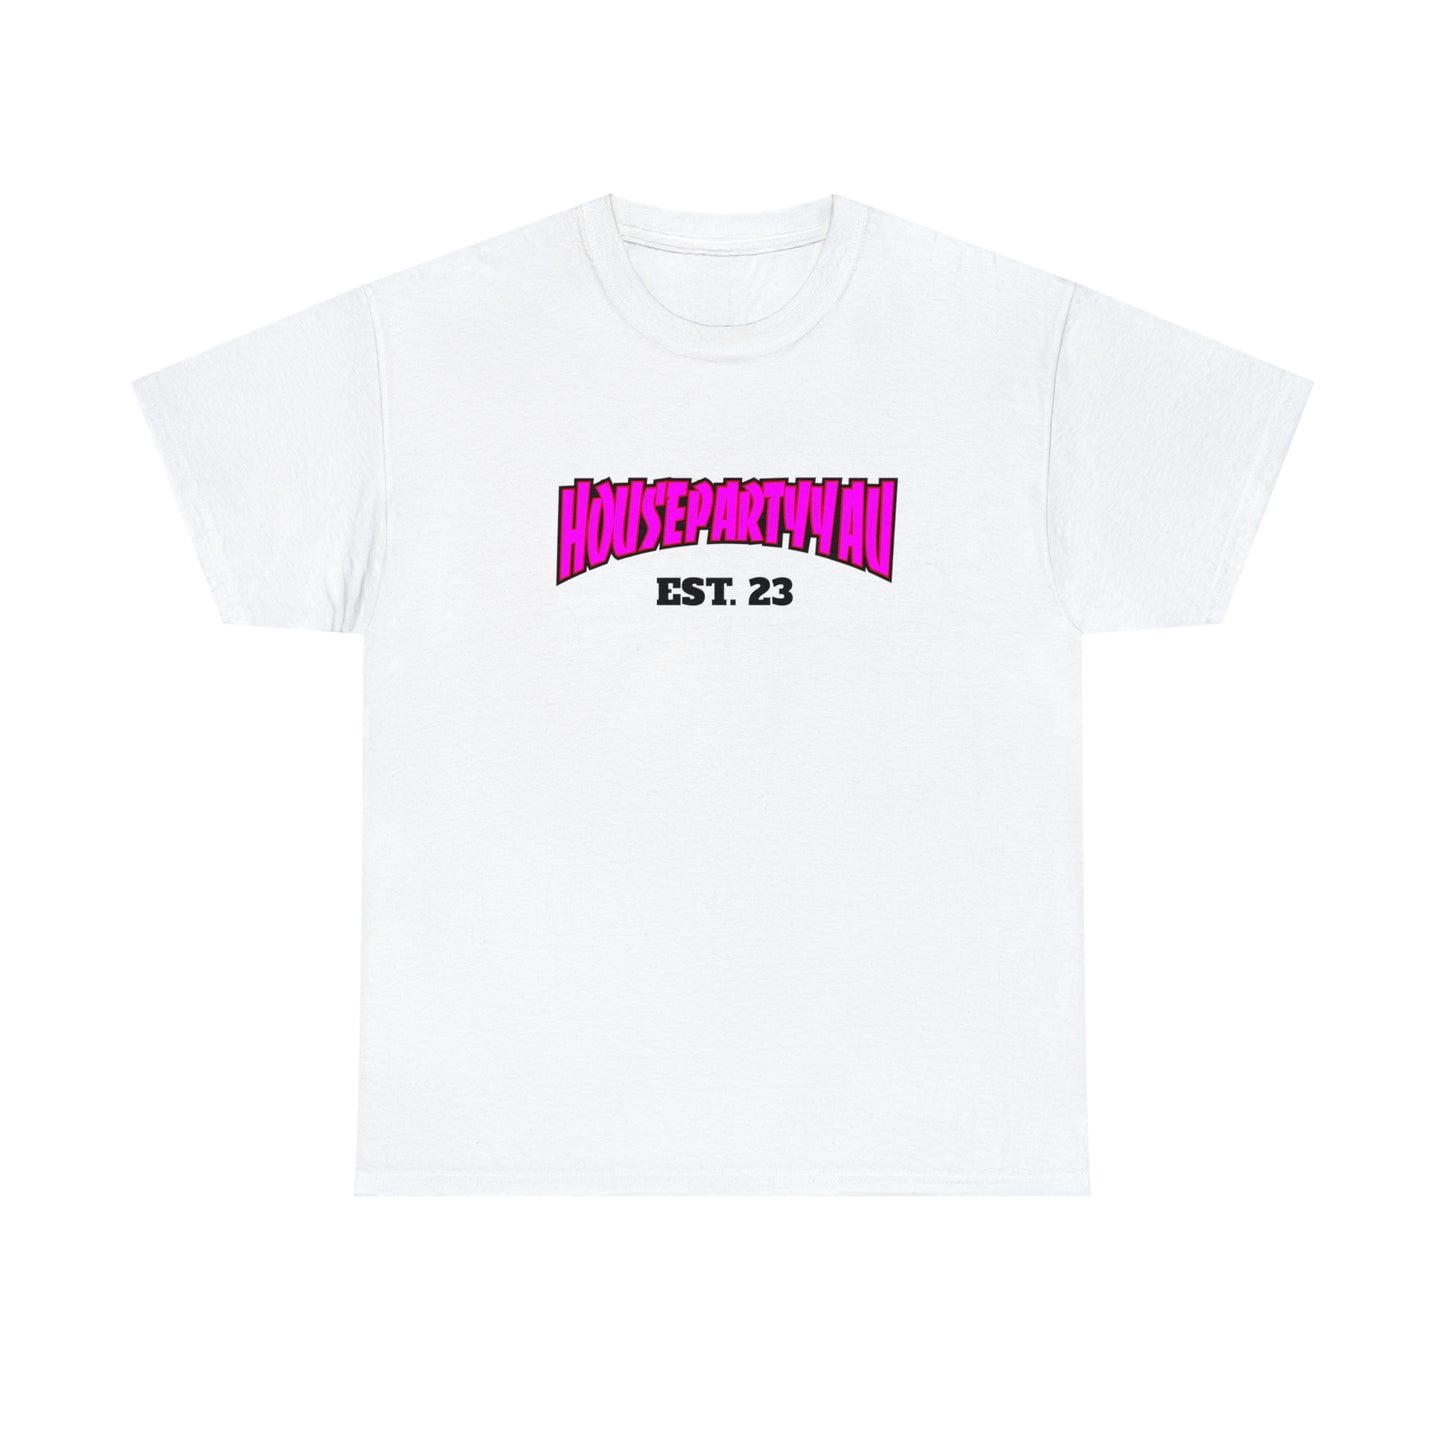 The Partyy Tee ™